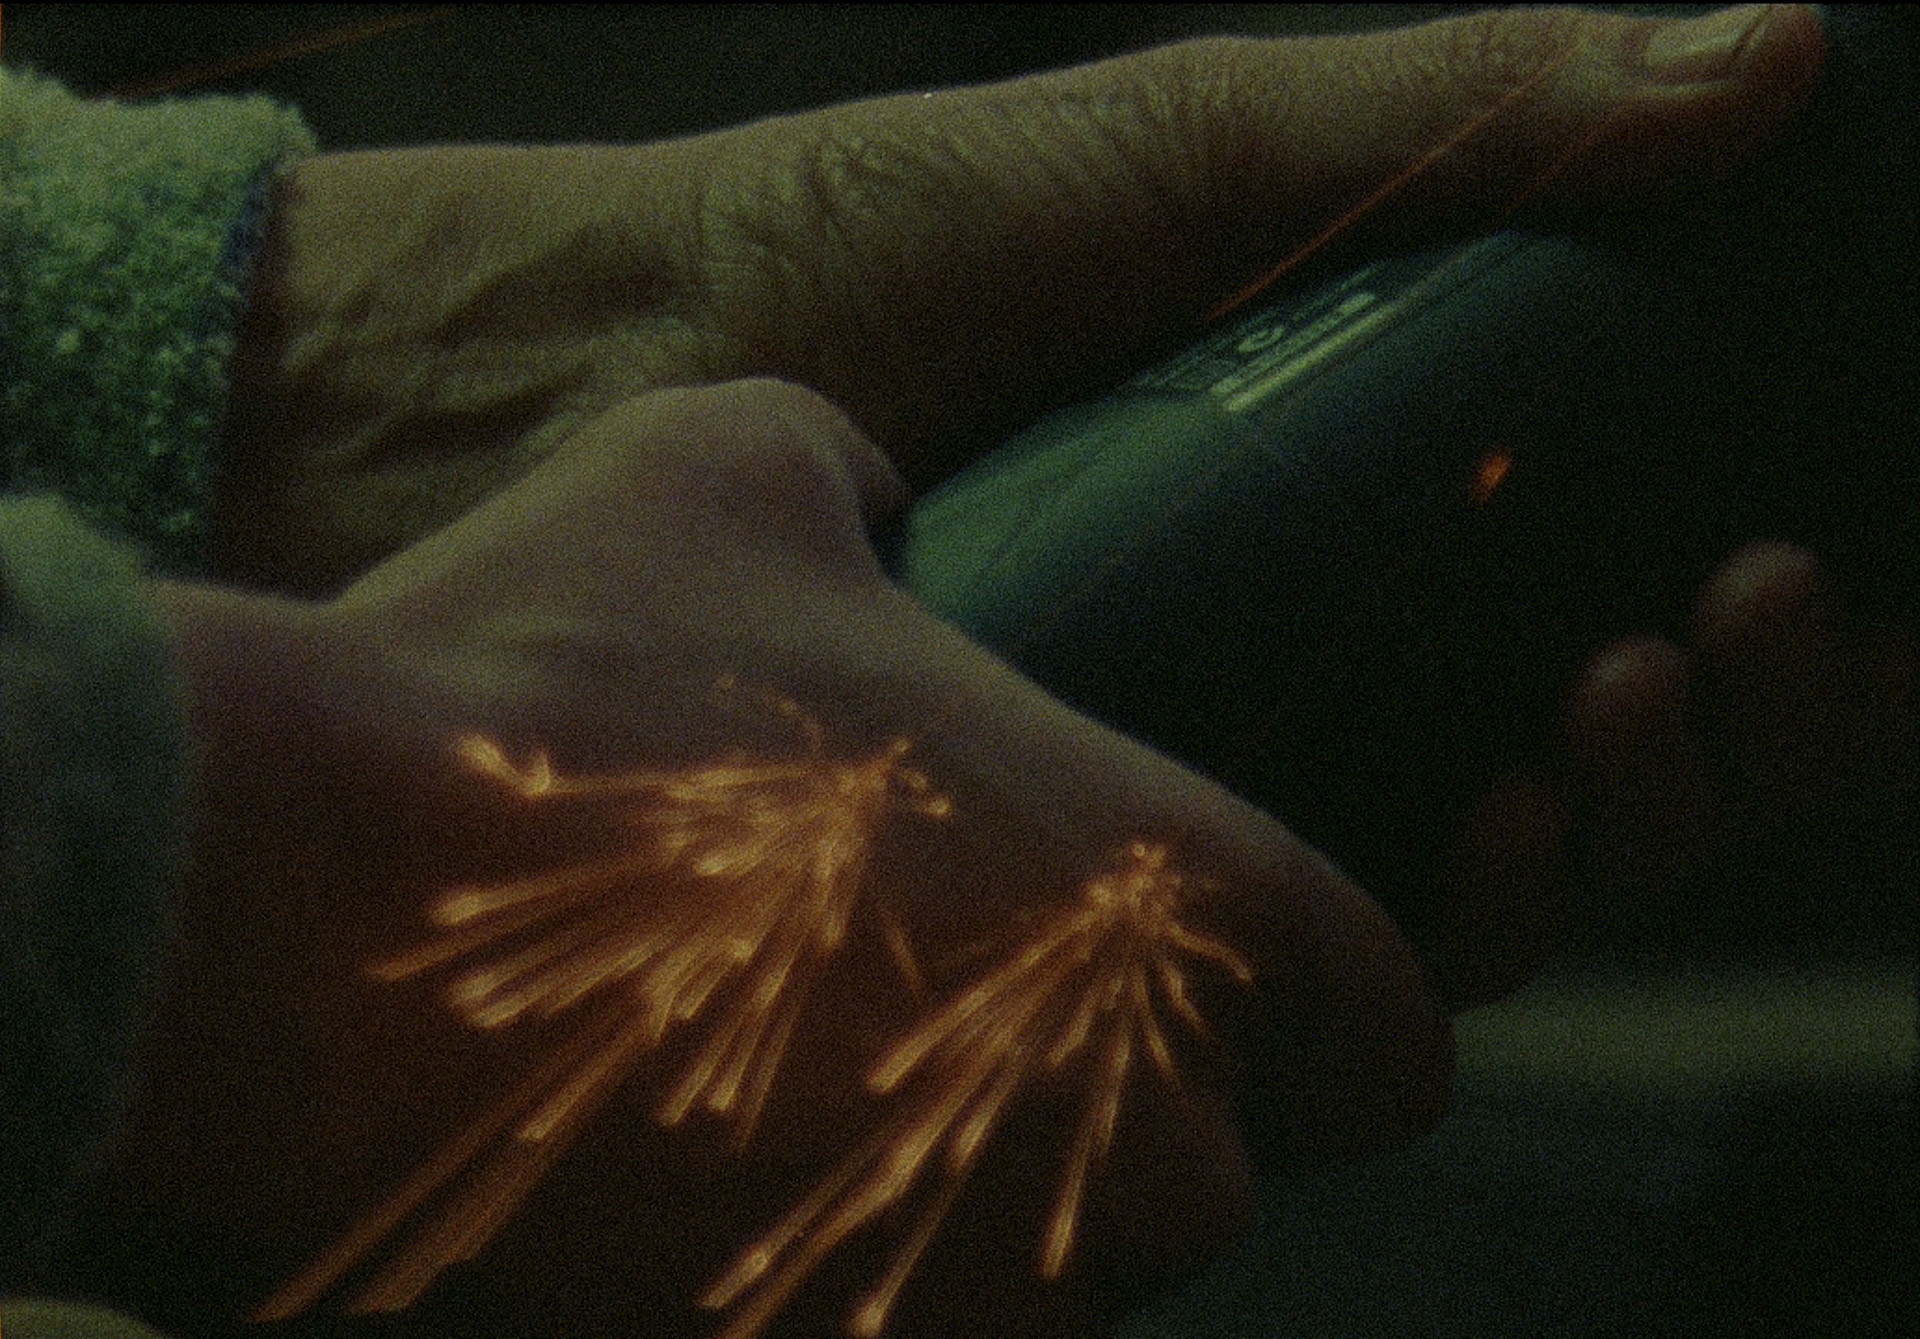 THE SPARK | VOL 1 [16MM]